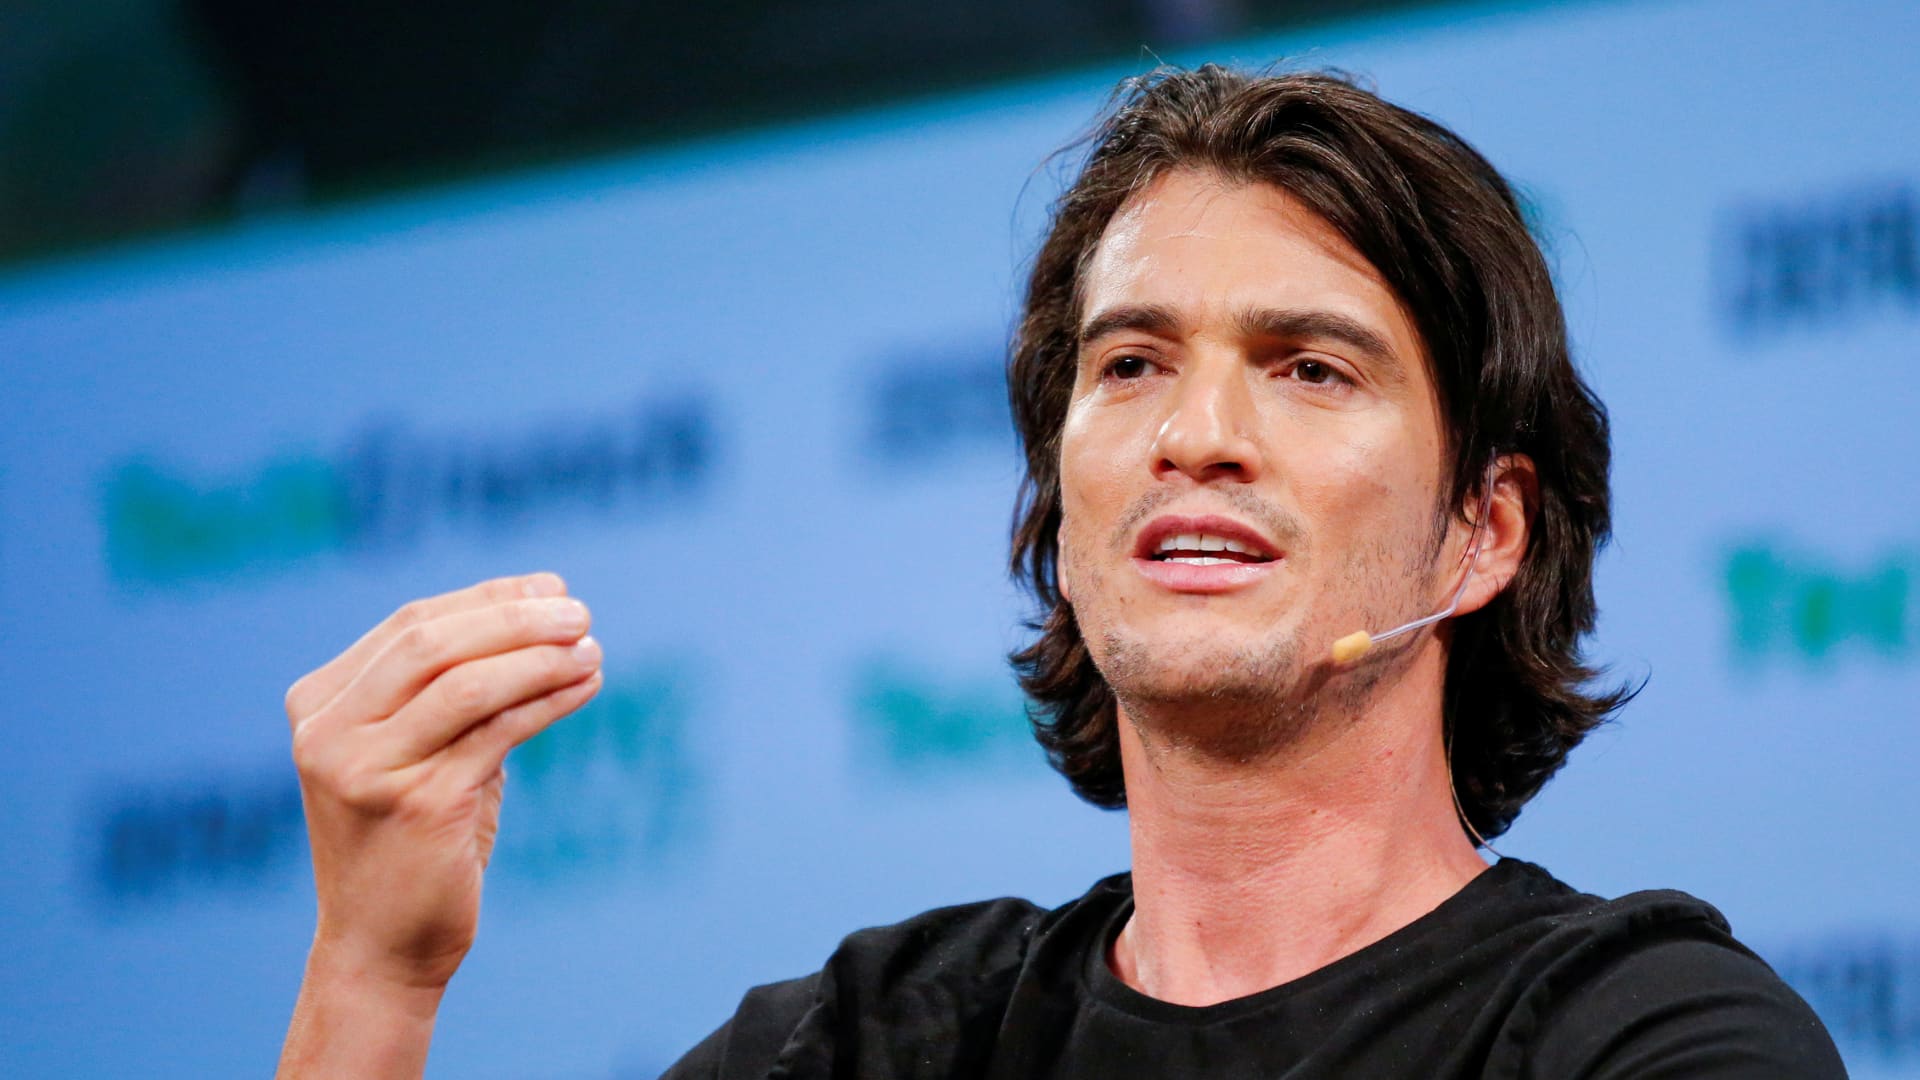 Adam Neumann is trying to buy WeWork, but Third Point says financing not committed